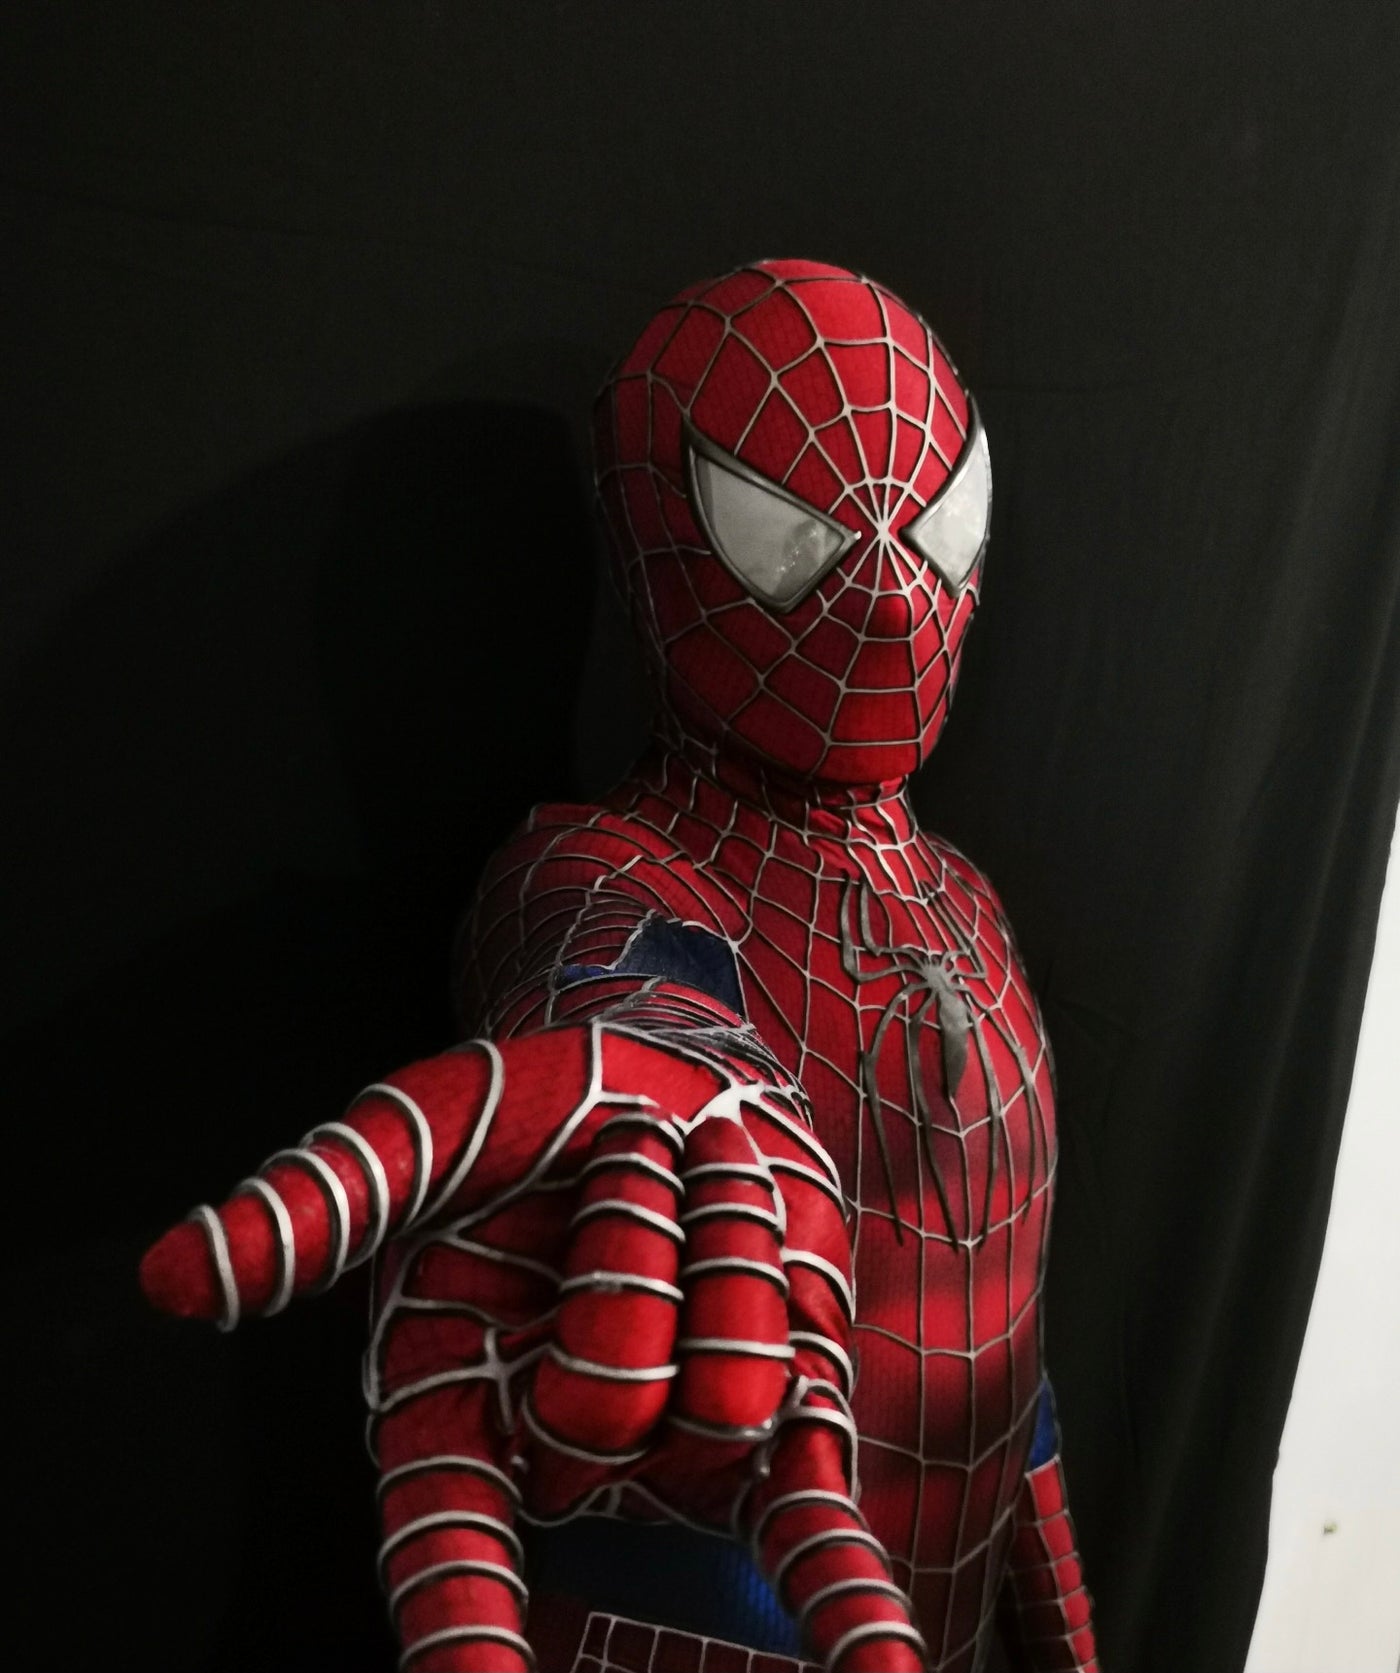 The Amazing Spiderman 2 Suit Amazing Spiderman 2 Costume With Faceshell and  Lenses Spiderman Cosplay Suit, Wearable Movie Prop Replica 